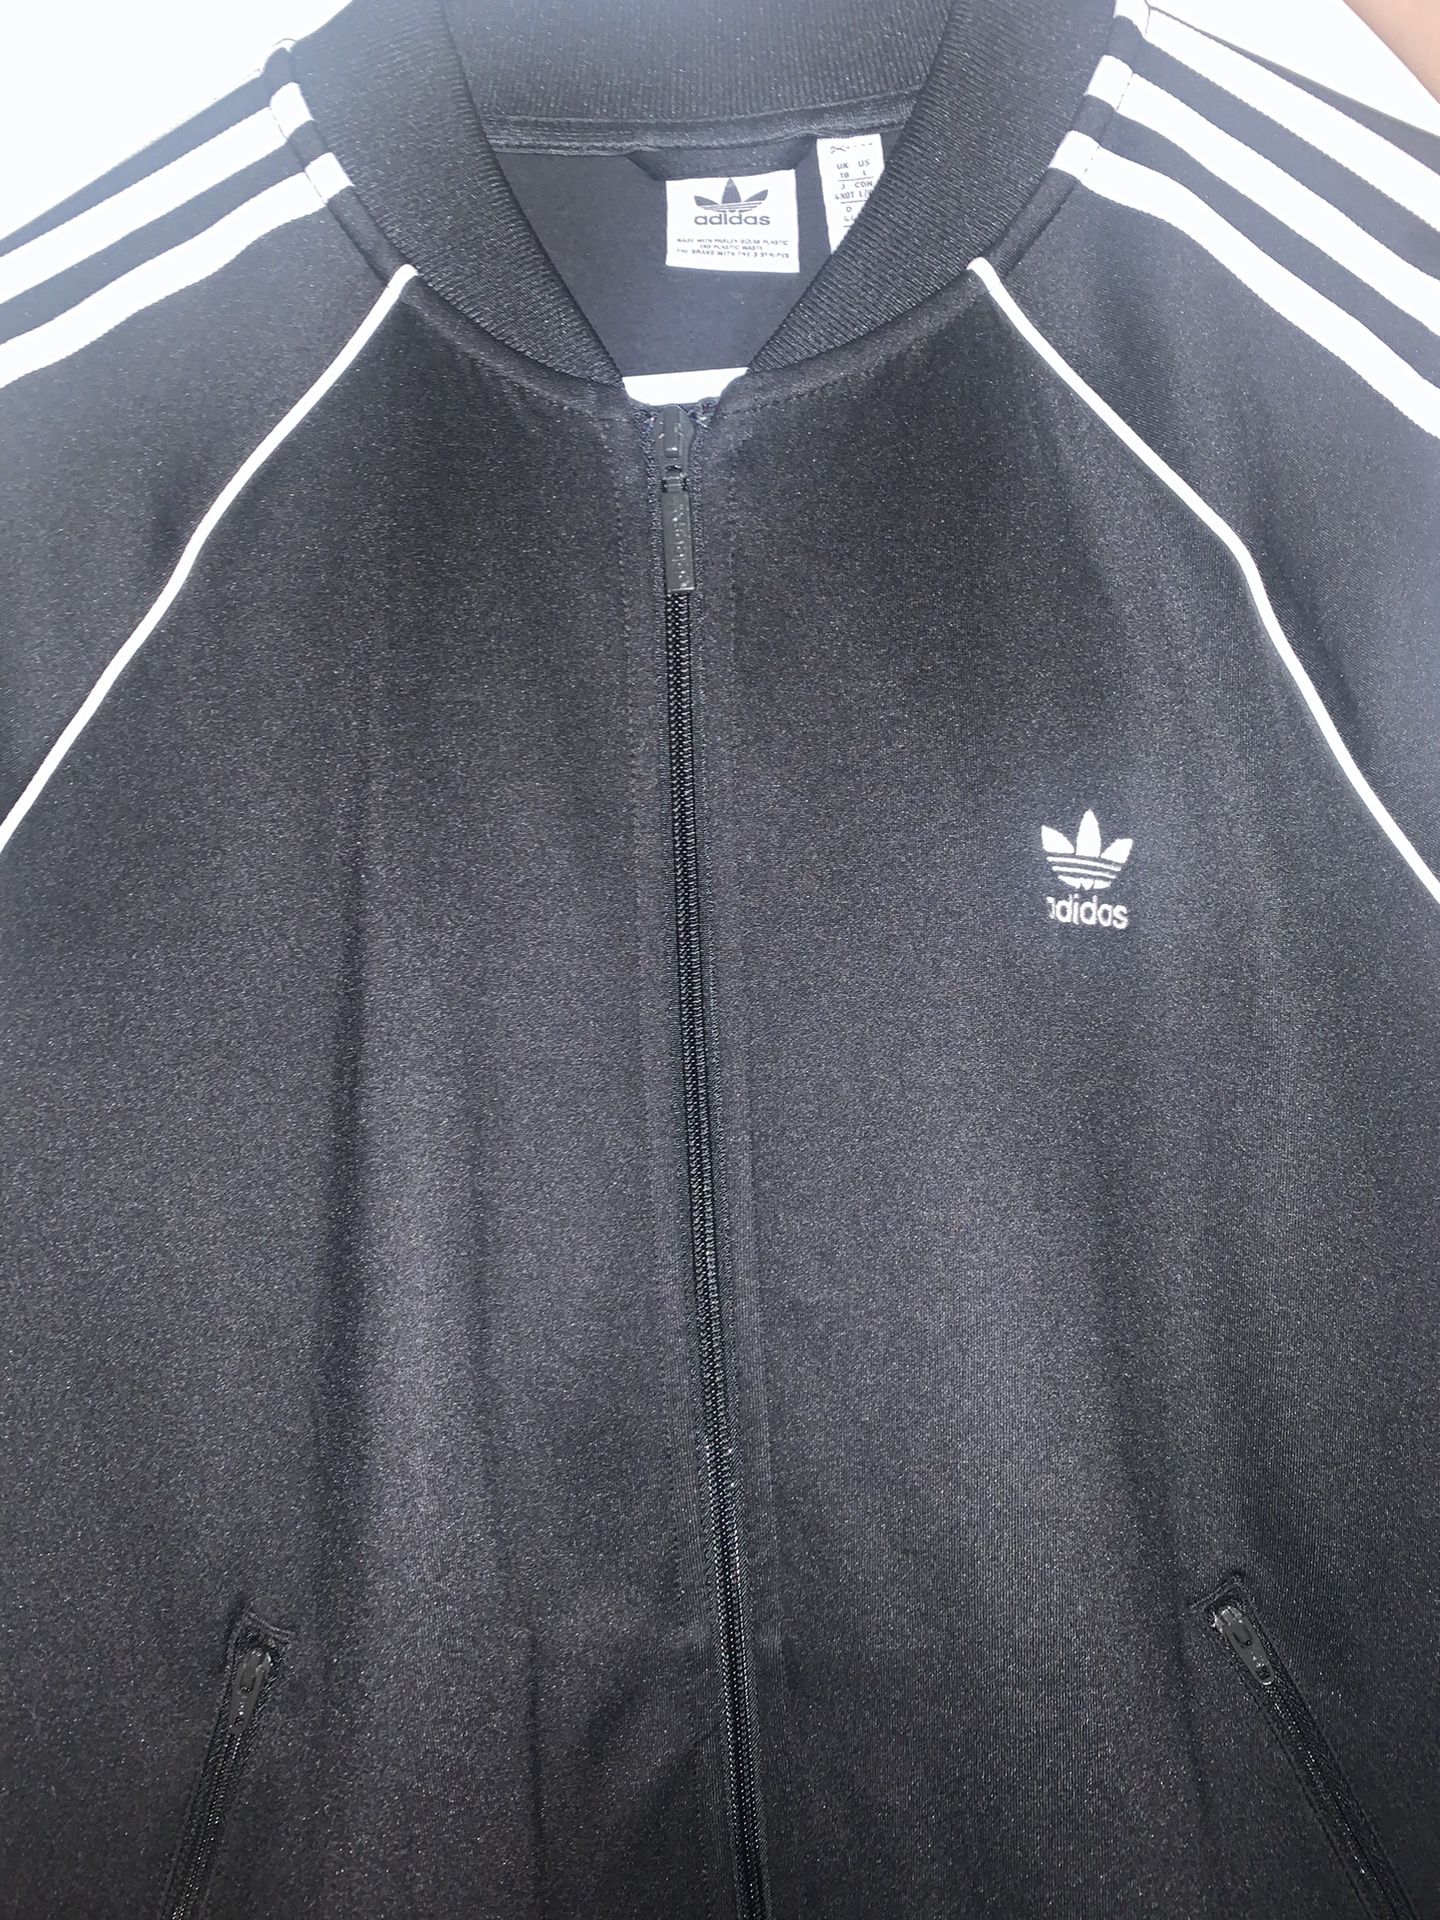 SWEATER BOMMER ADIDAS L